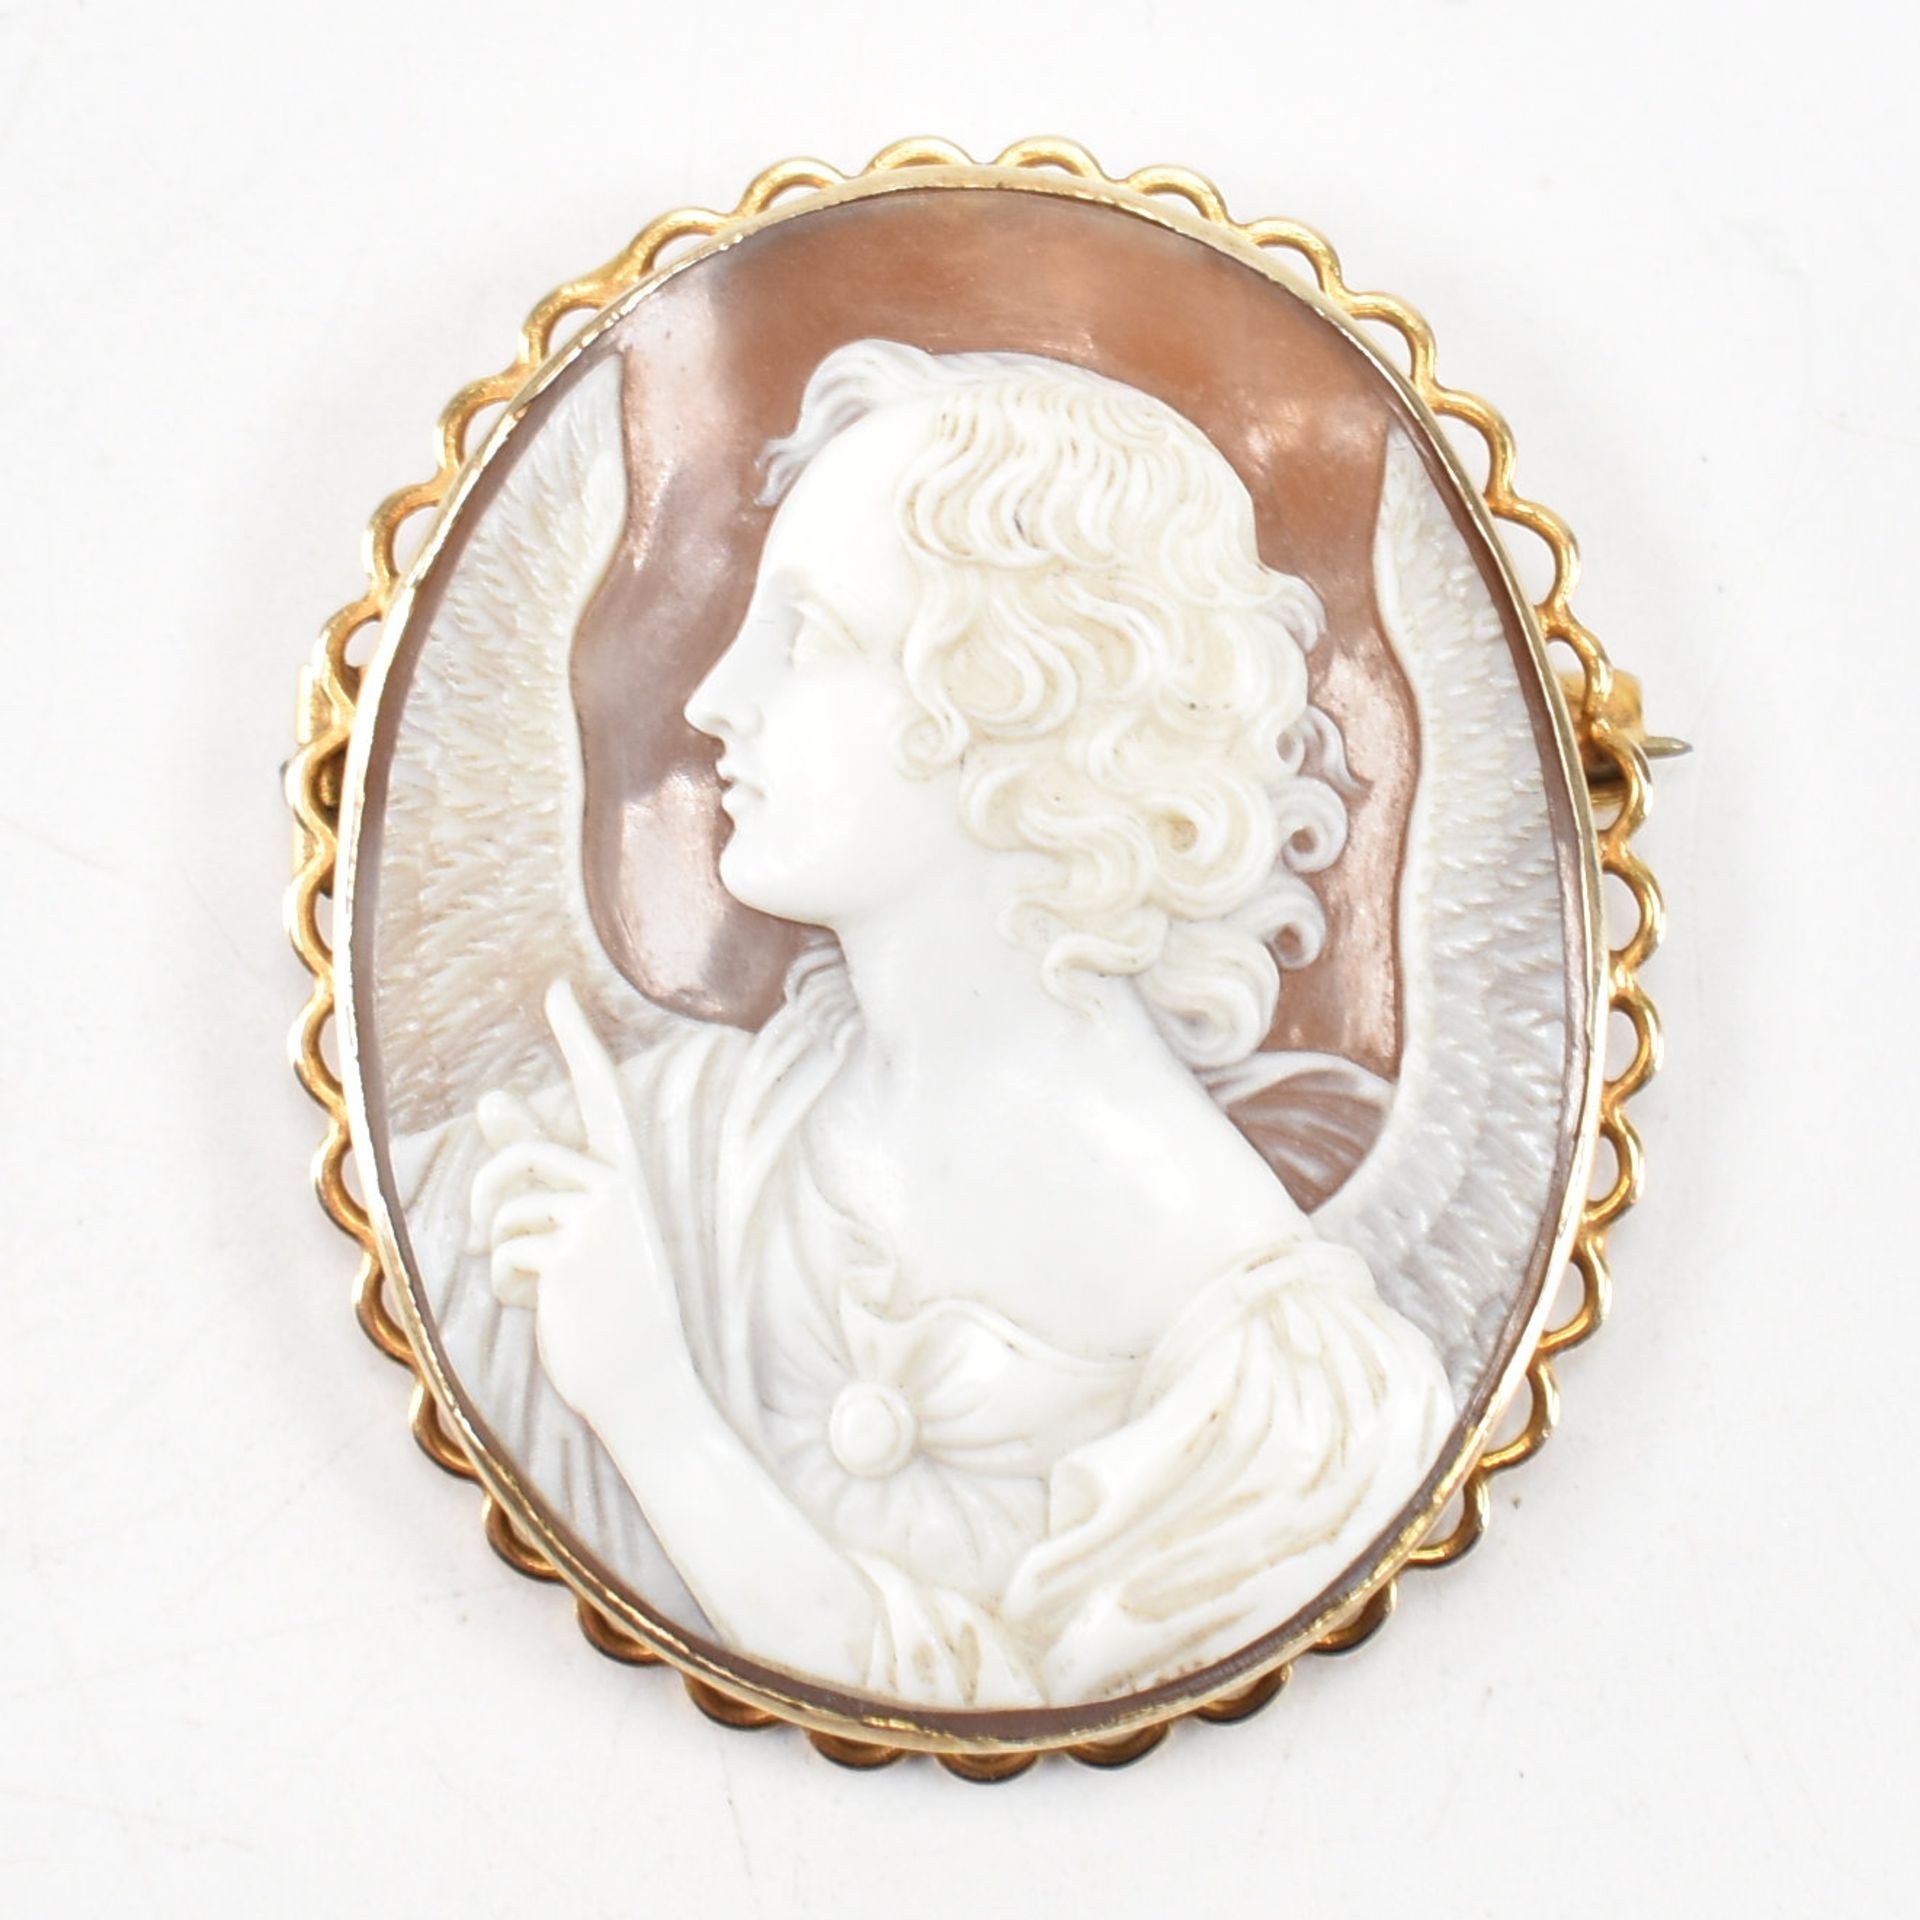 20TH CENTURY GOLD MOUNTED CARVED CAMEO BROOCH - Image 2 of 7